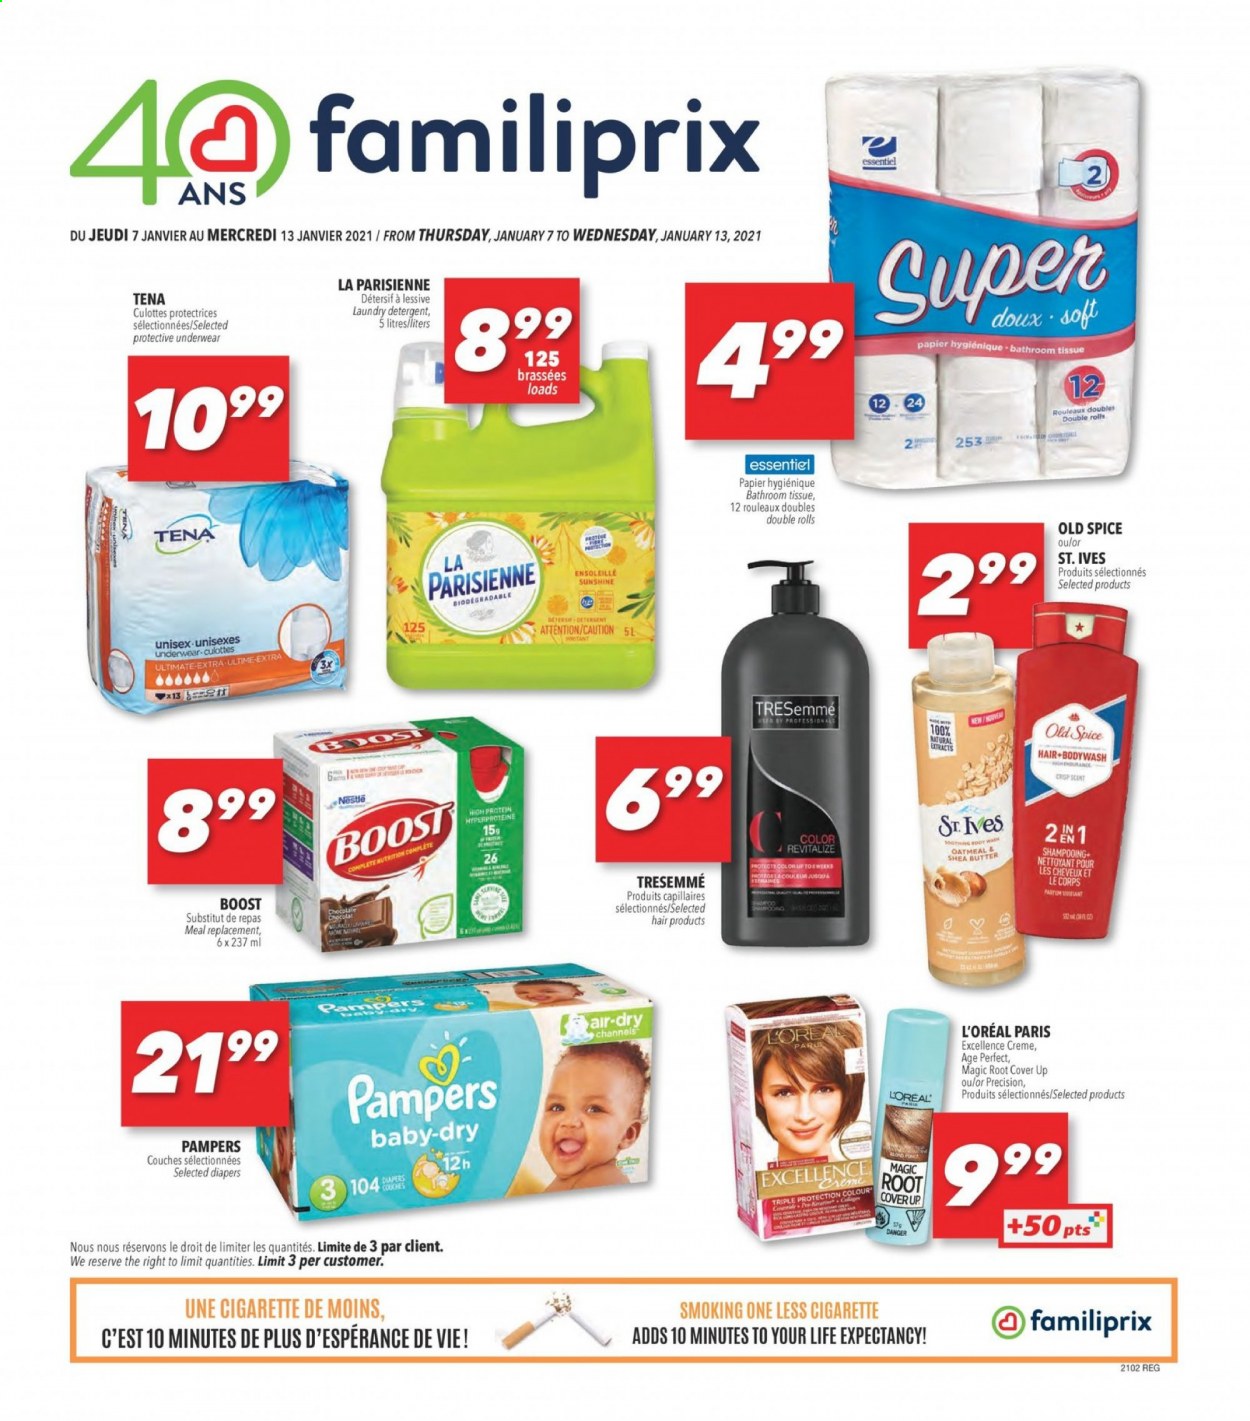 thumbnail - Familiprix Flyer - January 07, 2021 - January 13, 2021 - Sales products - oatmeal, spice, Boost, nappies, bath tissue, laundry detergent, L’Oréal, TRESemmé, shea butter, Nestlé, Pampers, Old Spice. Page 1.